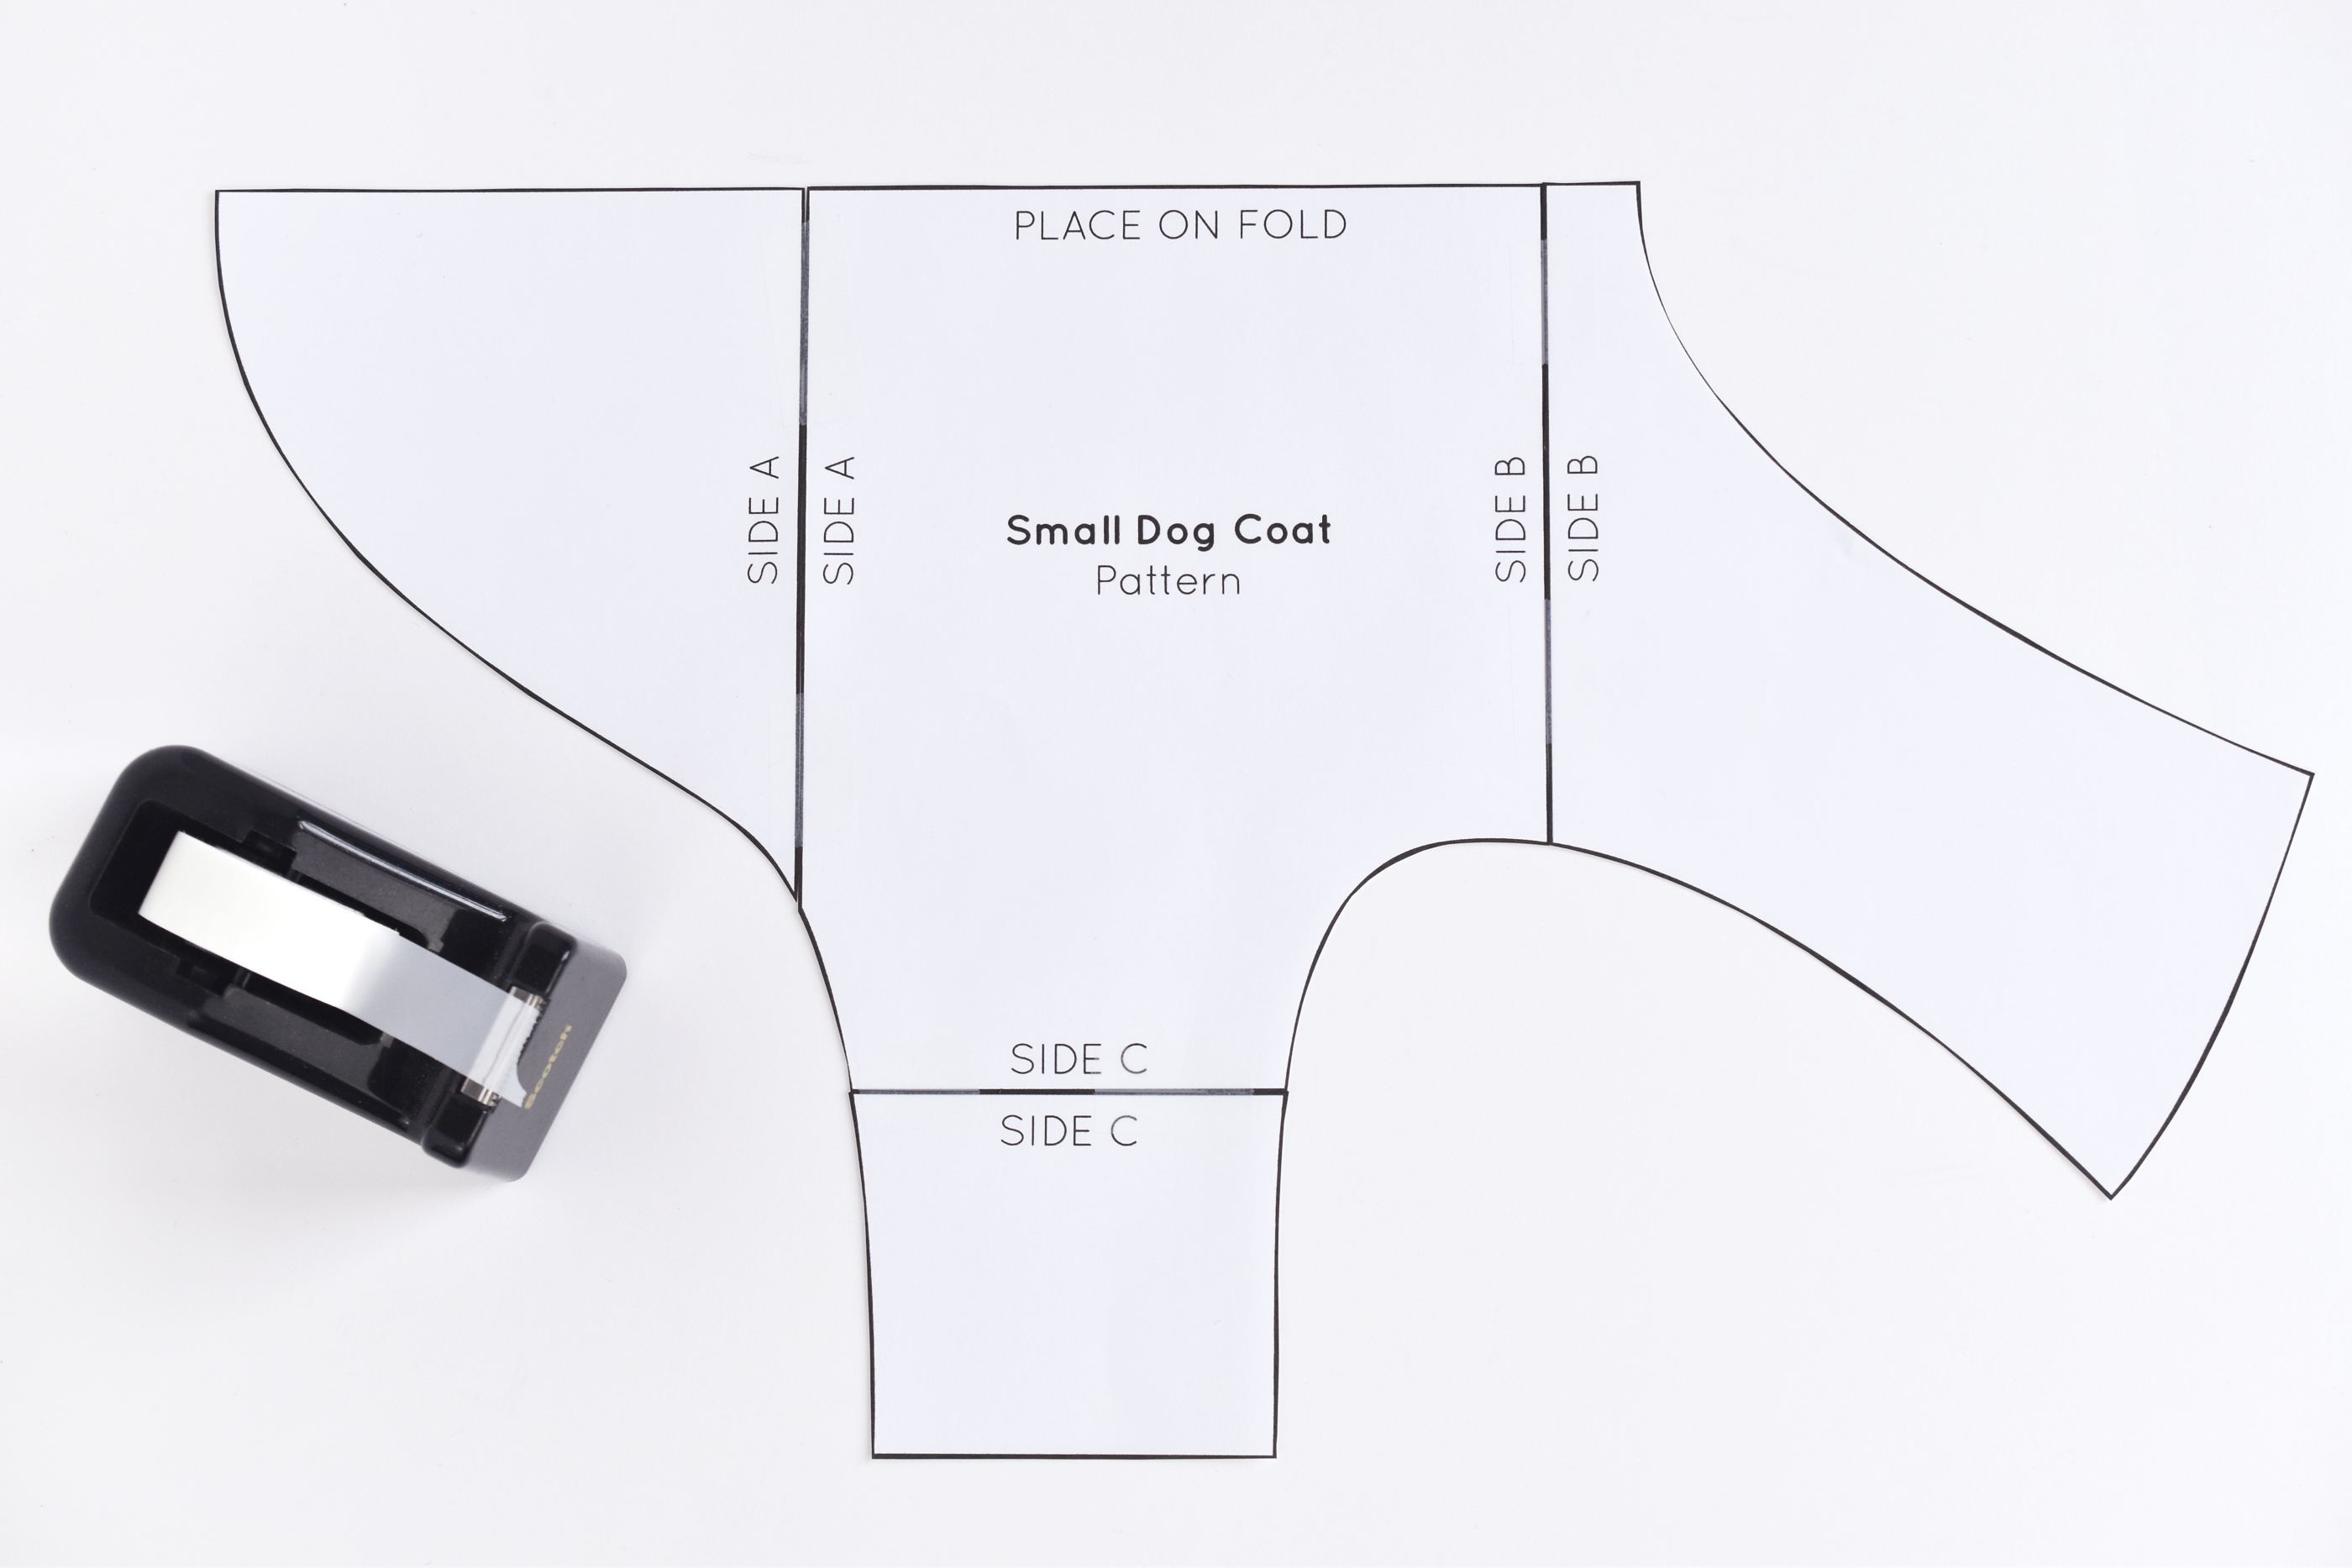 Free Sewing Pattern For A Warm, Weatherproof Dog Coat - Free Printable Dog Coat Sewing Patterns